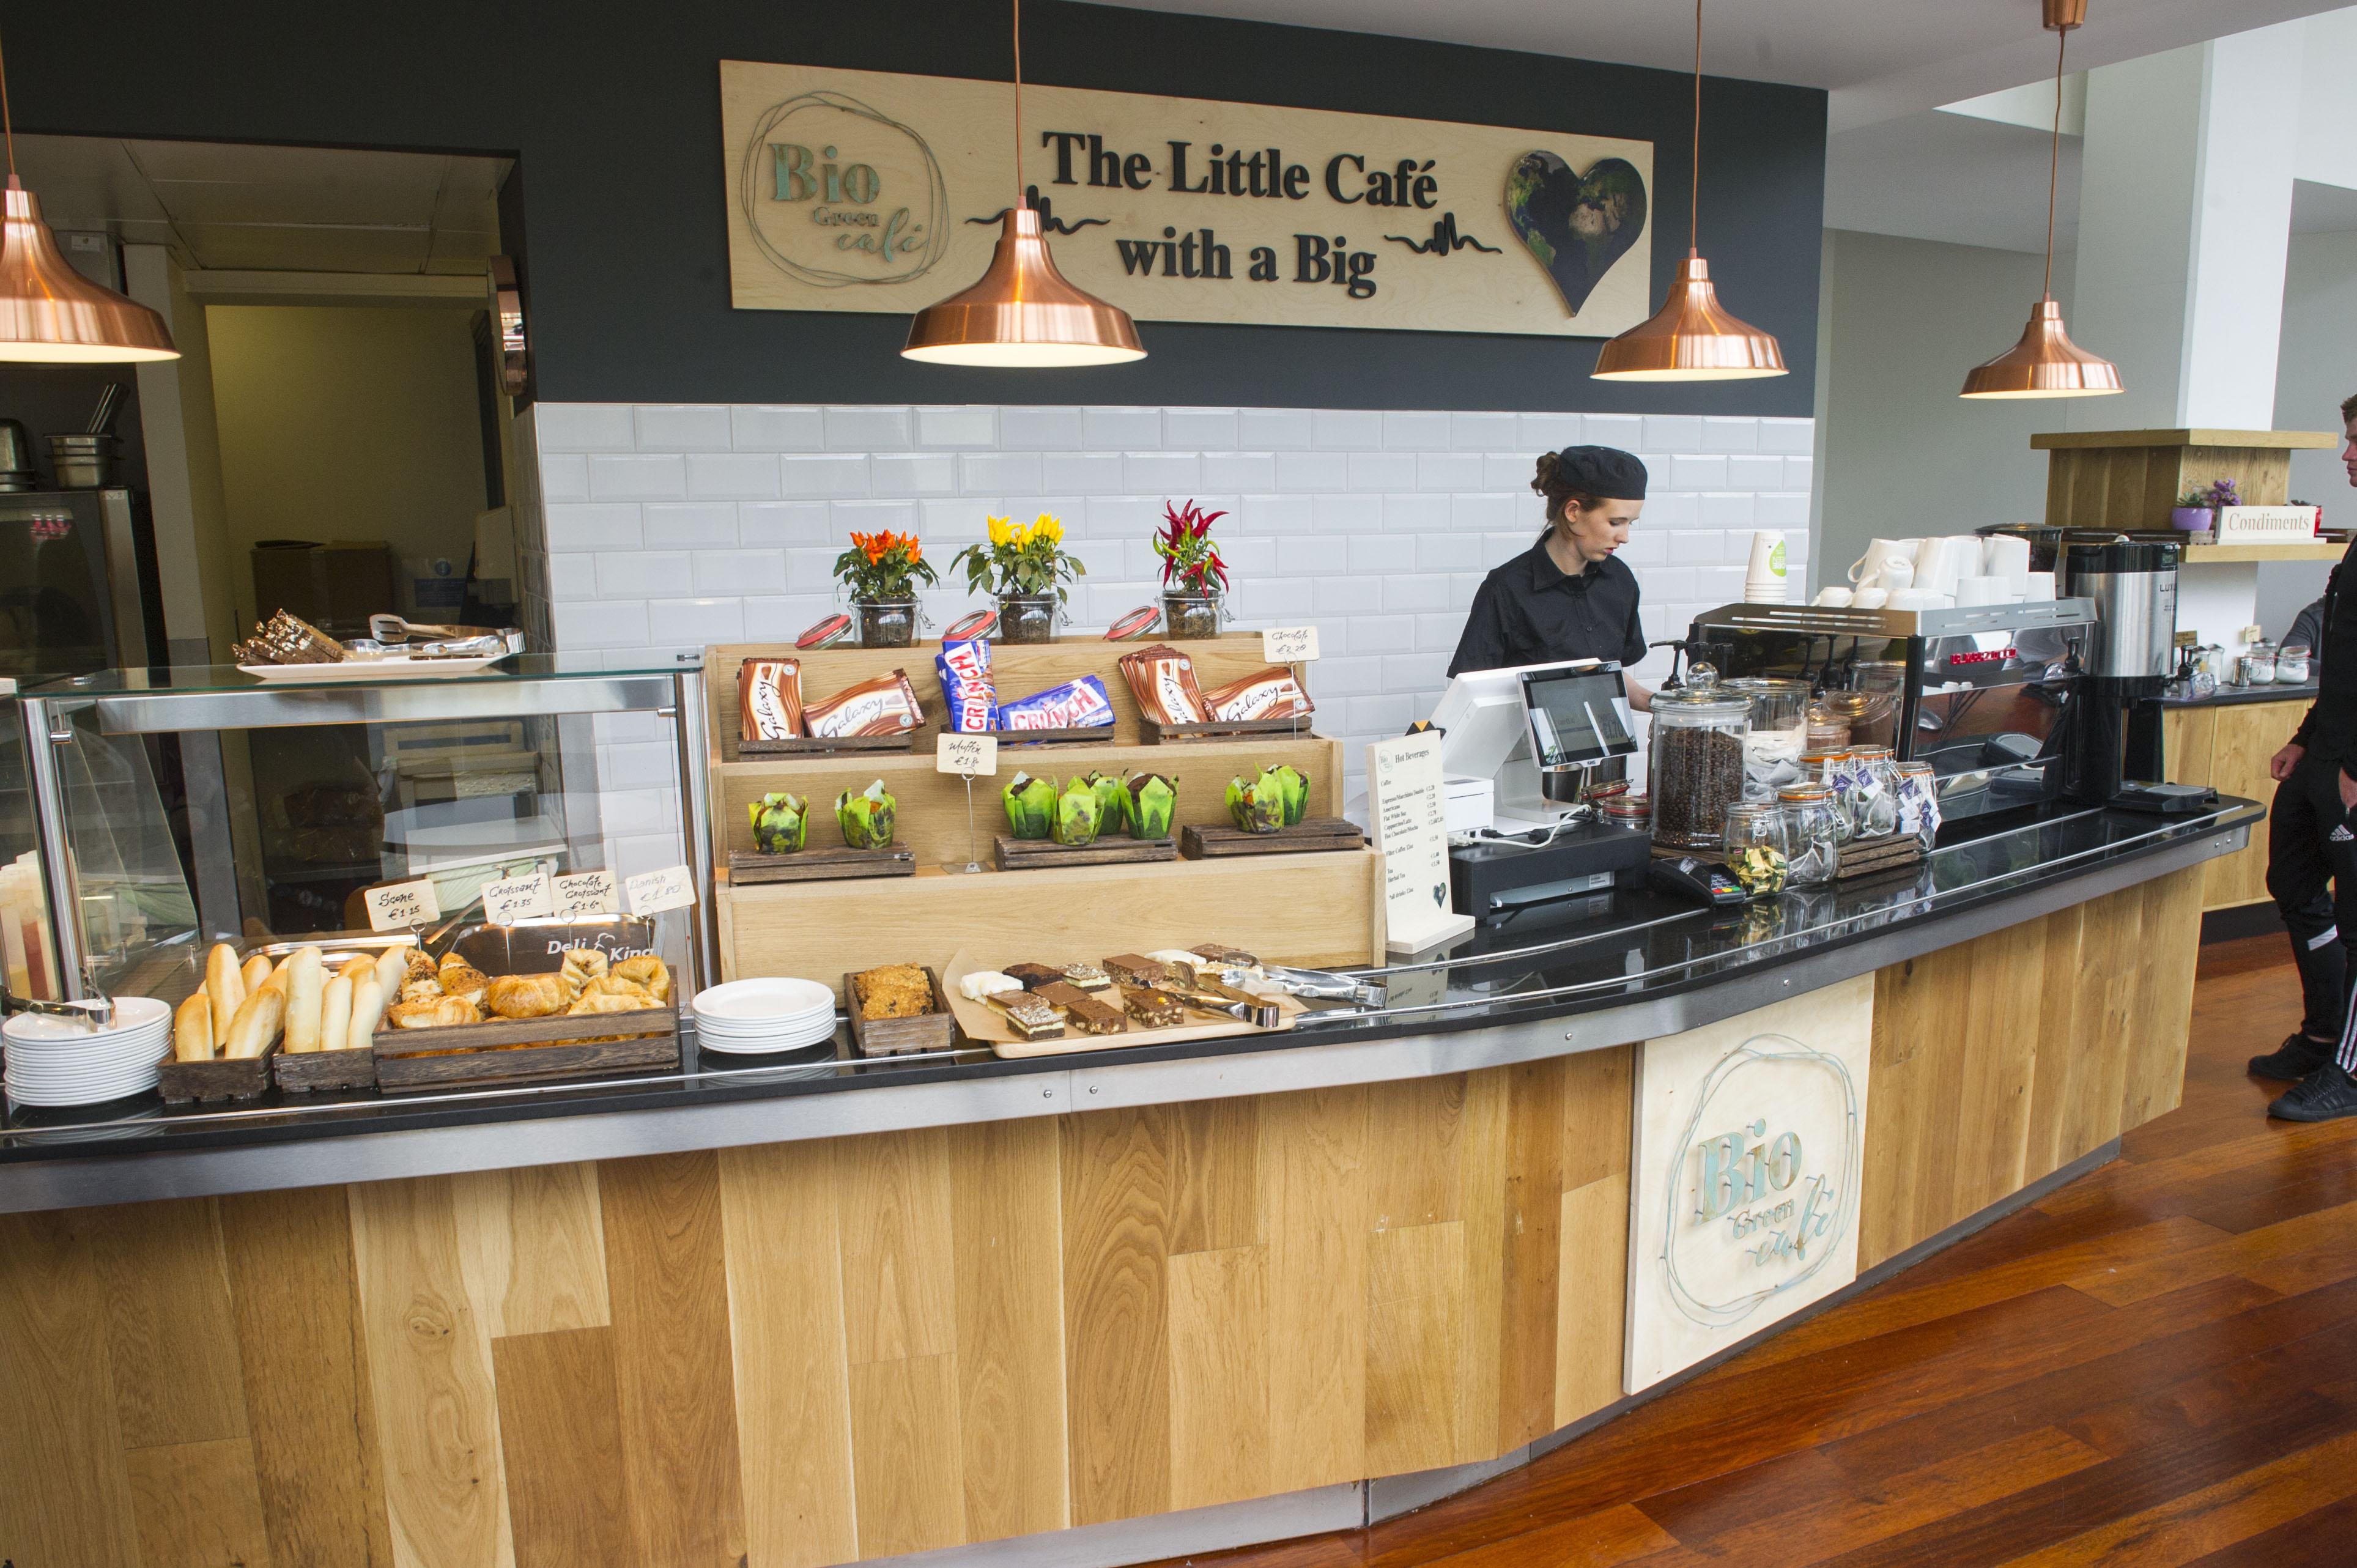 REPRO FREE
KSG Catering partnering with UCC on sustainability leadership launched Ireland’s first plastic free café. Located on the UCC campus in the Biosciences Institute the ‘Bio Green Café’ was refurbished in August and opened as Ireland’s first plastic free café on Tuesday September 11th. KSG in collaboration with UCC has installed and implemented a number of innovative sustainability practices for the café operation as part of this pilot project. In light of the numerous environmental issues associated with single use plastic the goal of the project is to totally eliminate all variants of single use plastic in a UCC campus café. KSG has partnered with the UCC Green Campus Committee and jointly a number of initiatives have been launched in the cafe. 
Pic Daragh Mc Sweeney/Provision